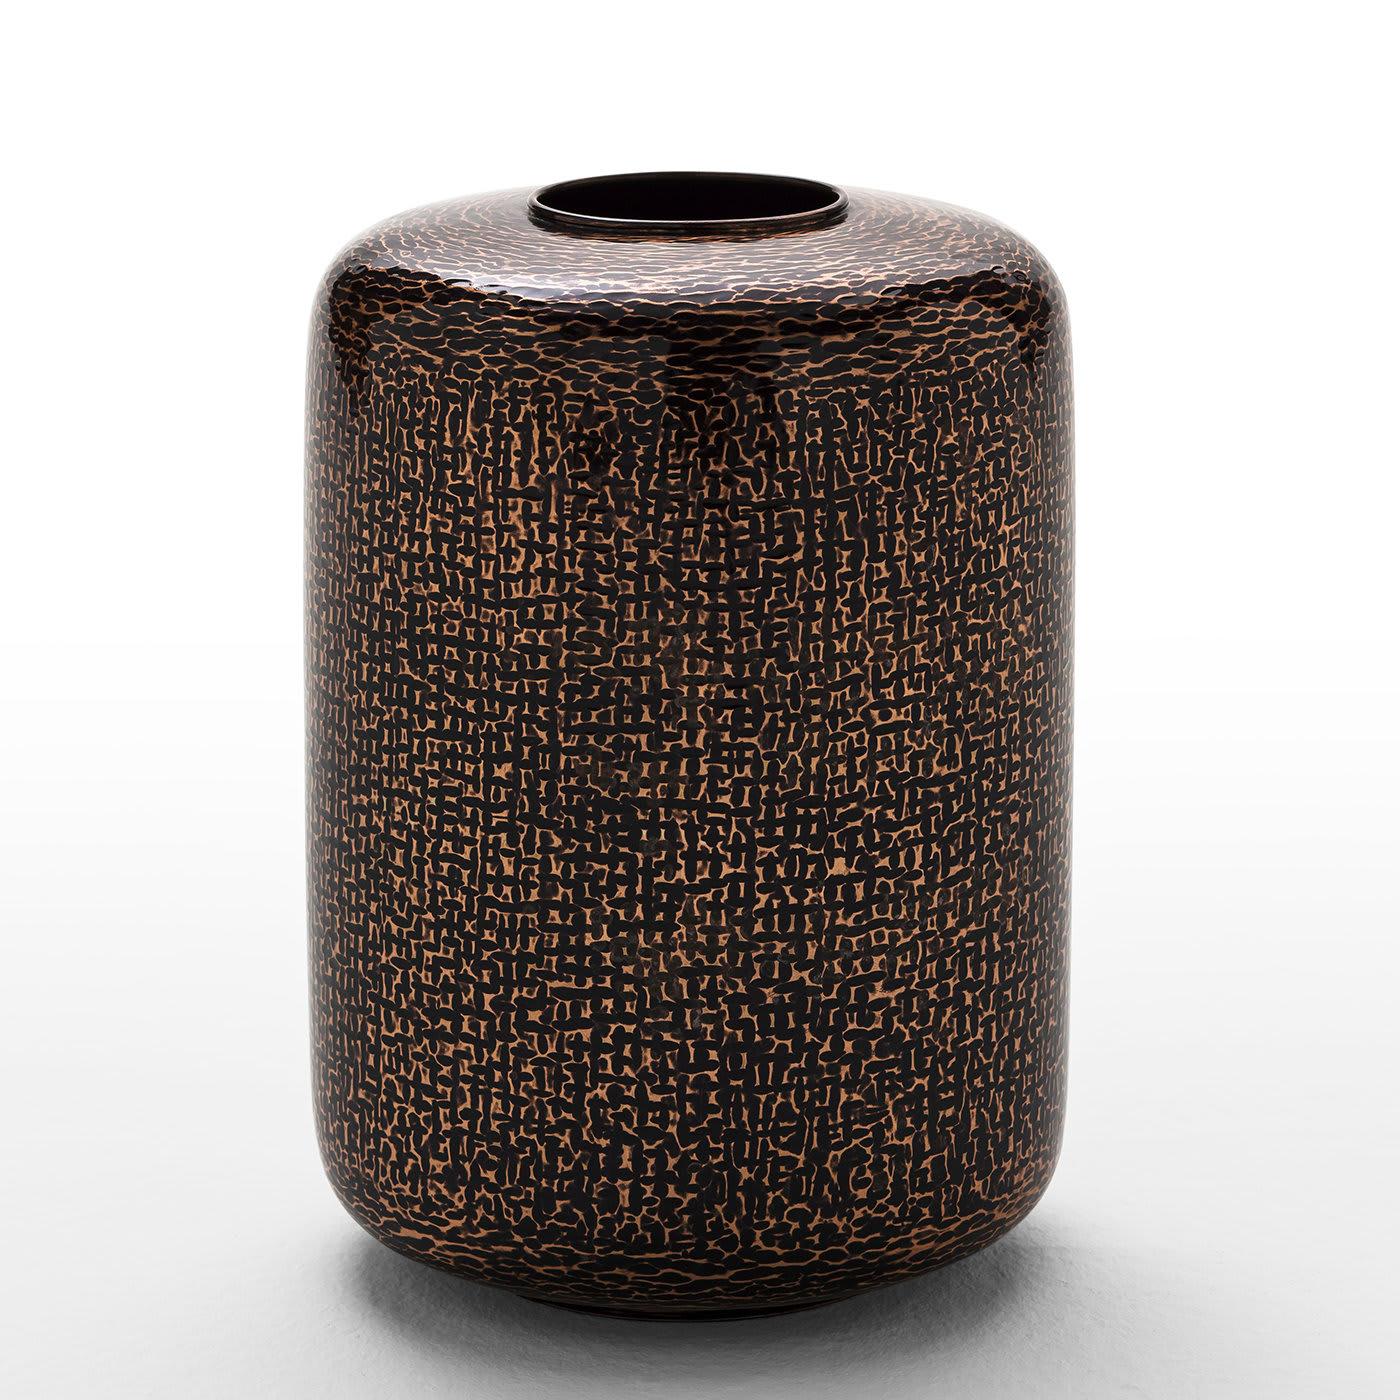 Named after its slim and straight silhouette, this exquisite vase features a cylindrical shape and an eye-catching motif created by the combination of copper and burnished varnish, that will imbue any interior with a gleaming allure.